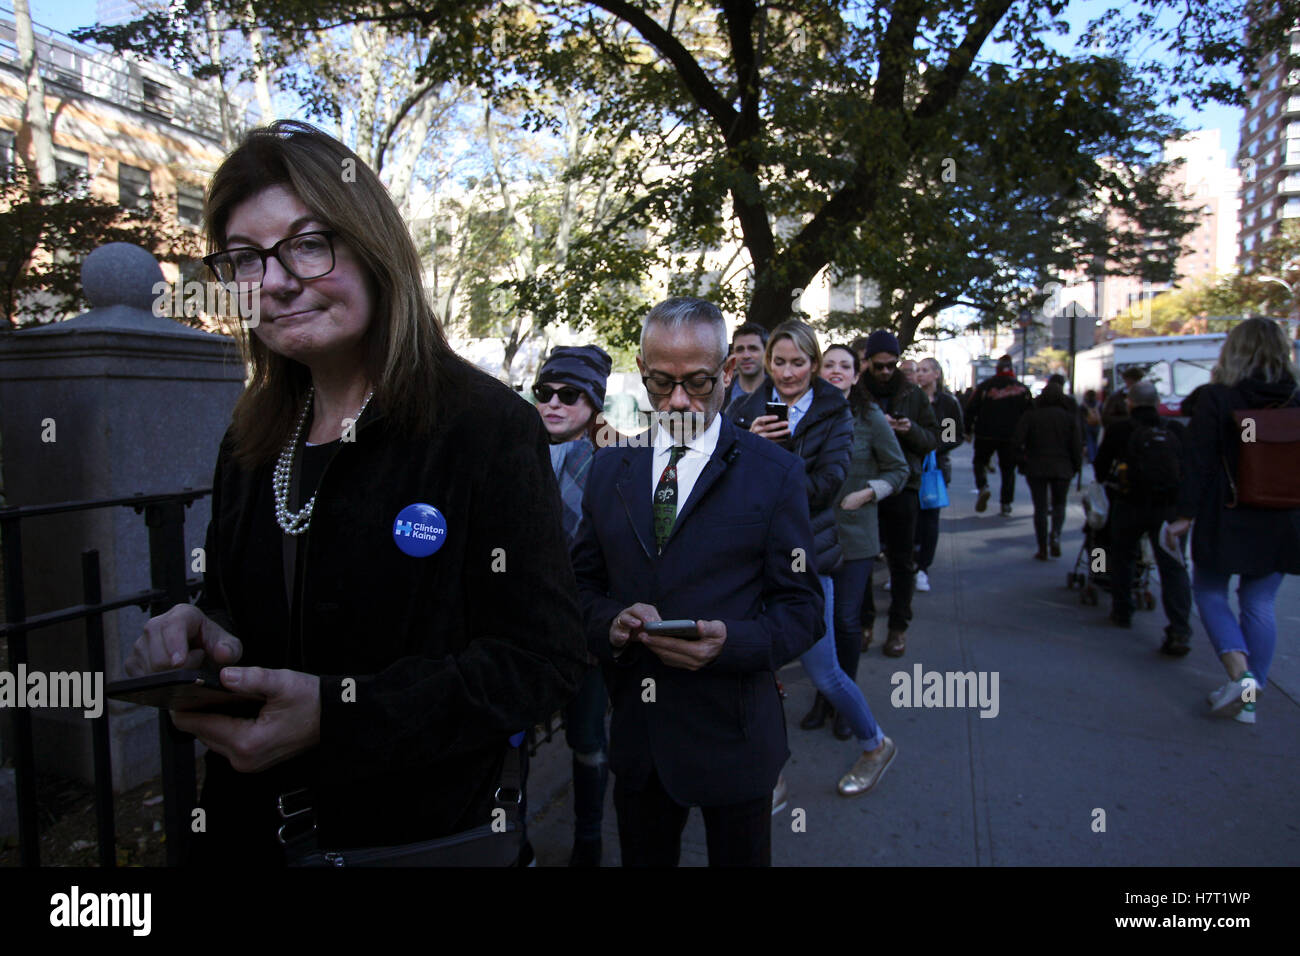 New York, United States. 08th Nov, 2016. Voters in the Chelsea neighborhood of Manhattan in New York City line up to vote on Election Day, November 8, 2016. Record numbers of voters are turning our for the historic United States Presidential election between Hilary Clinton and Donald Trump. Credit:  Adam Stoltman/Alamy Live News Stock Photo